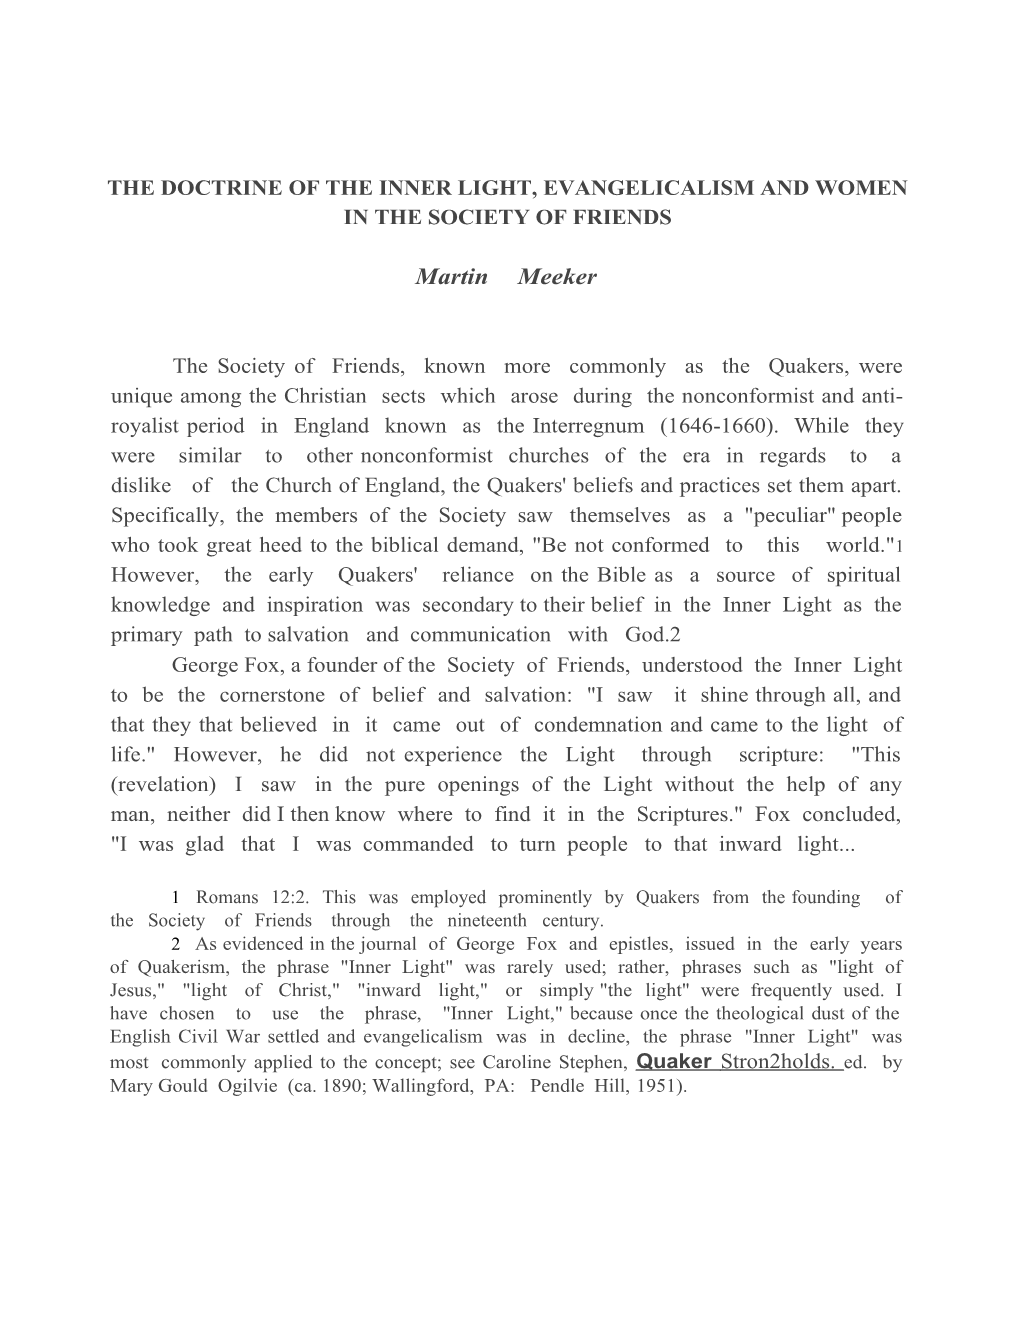 The Doctrine of the Inner Light, Evangelicalism and Women in the Society of Friends